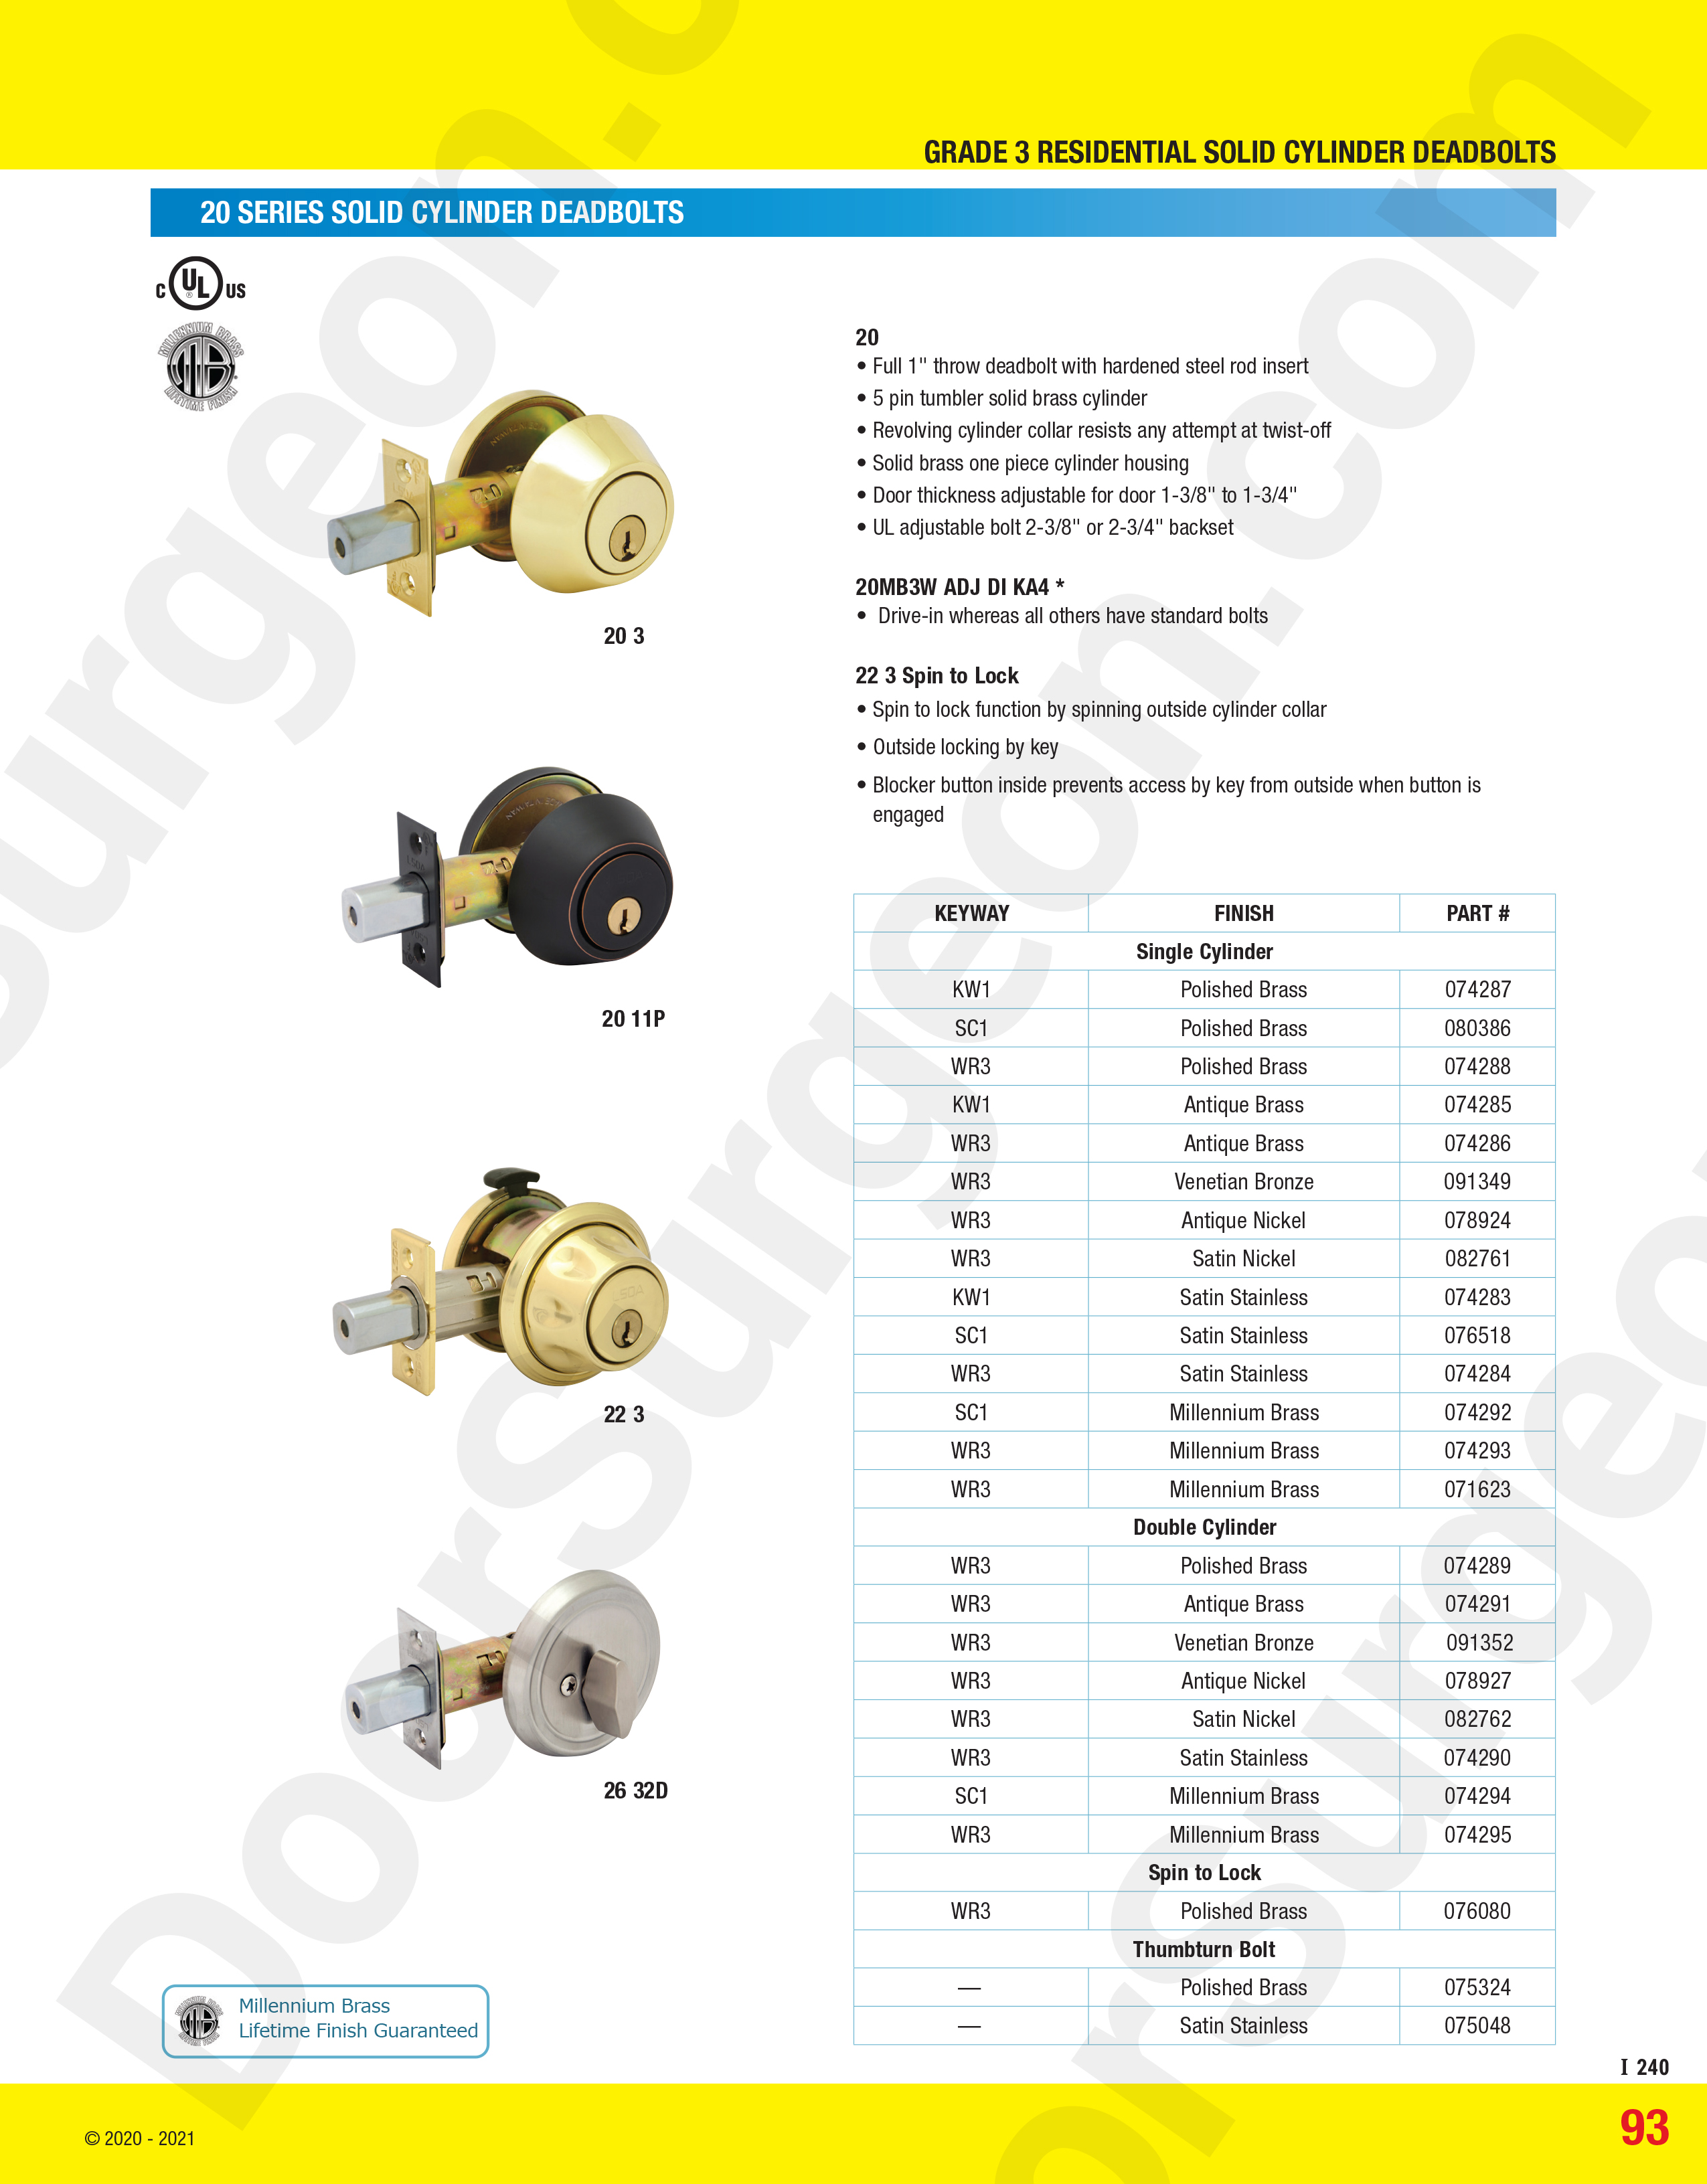 top of grade deadbolts come in silver, brass, nickle, stainless steel and venetian bronze colours, single-sided cylindar or double-sided cylindar